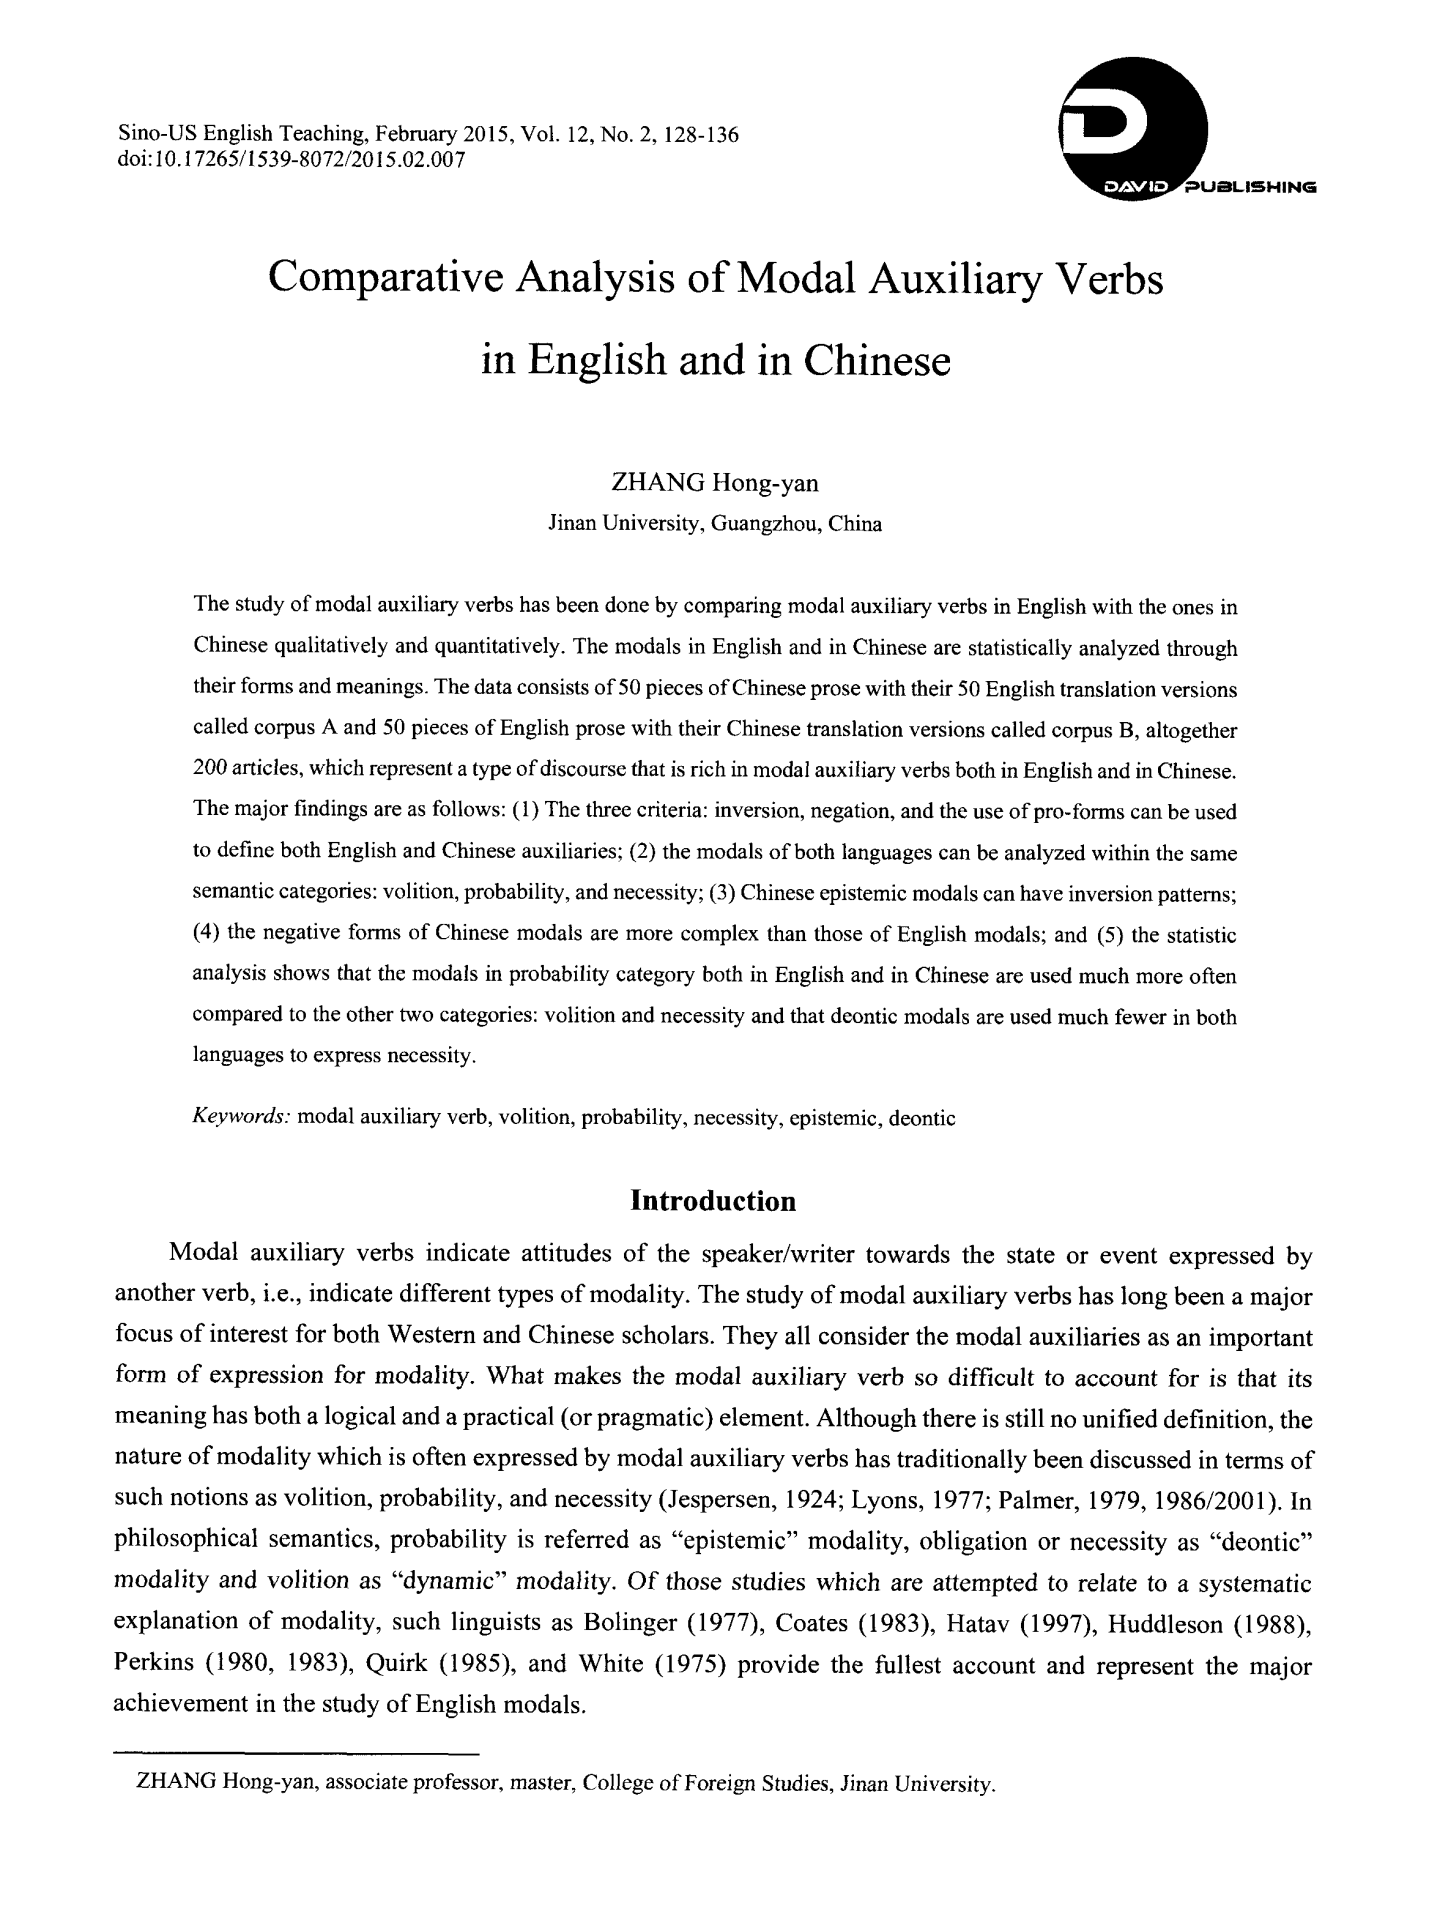 Comparative Analysis of Modal Auxiliary Verbs in English and in Chinese